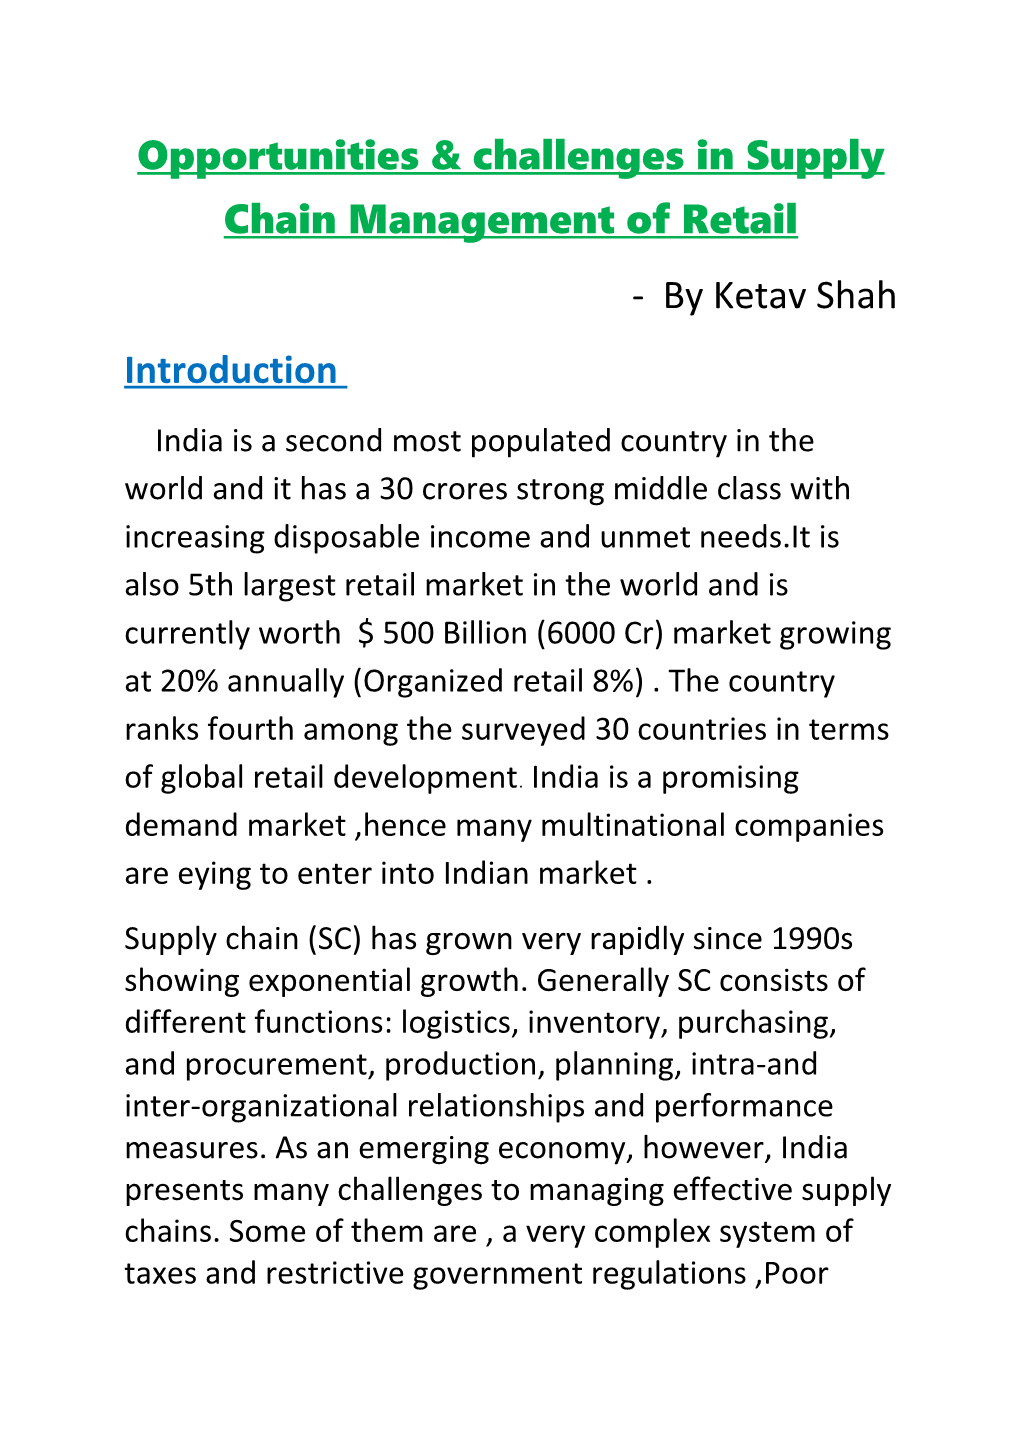 Opportunities & Challenges in Supply Chain Management of Retail